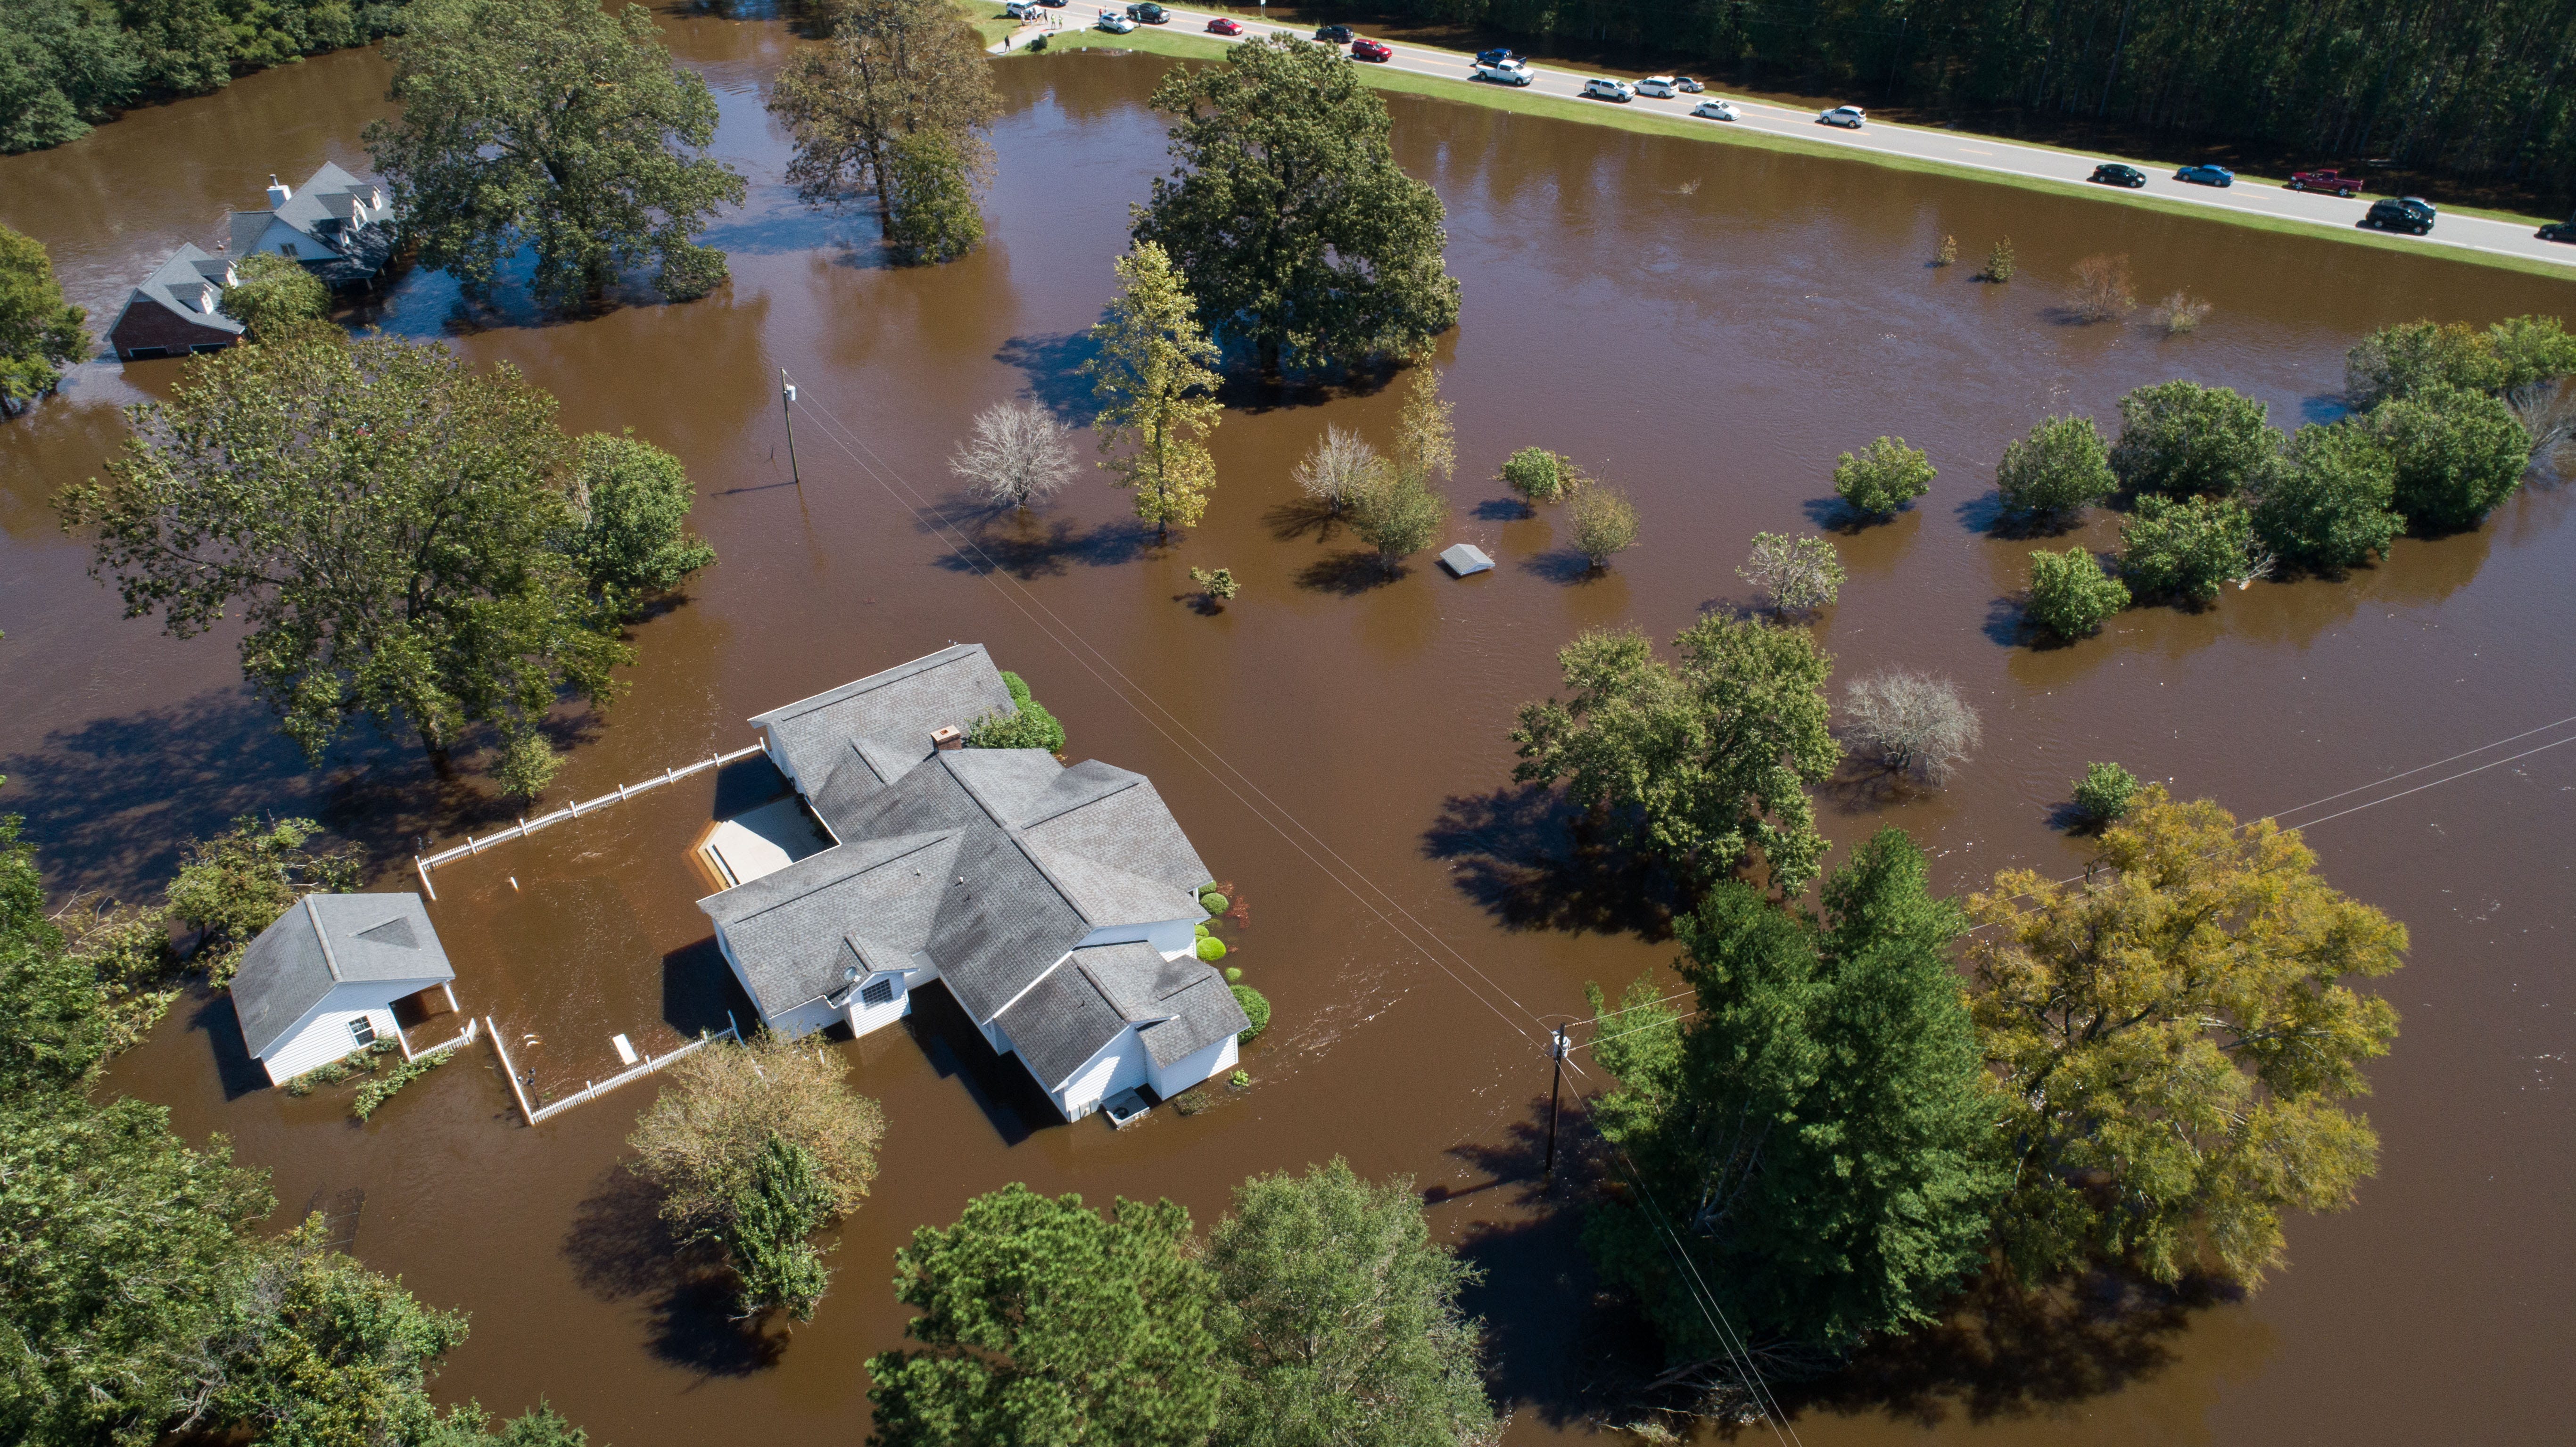 Homes on the Wood family's property are seen severely flooded Tuesday, Sept. 18, 2018, in the aftermath of Florence in Linden, N.C. Dale Wood, who has lived on the property about 47 years, and his wife, Angie Wood, said their home was also flooded by